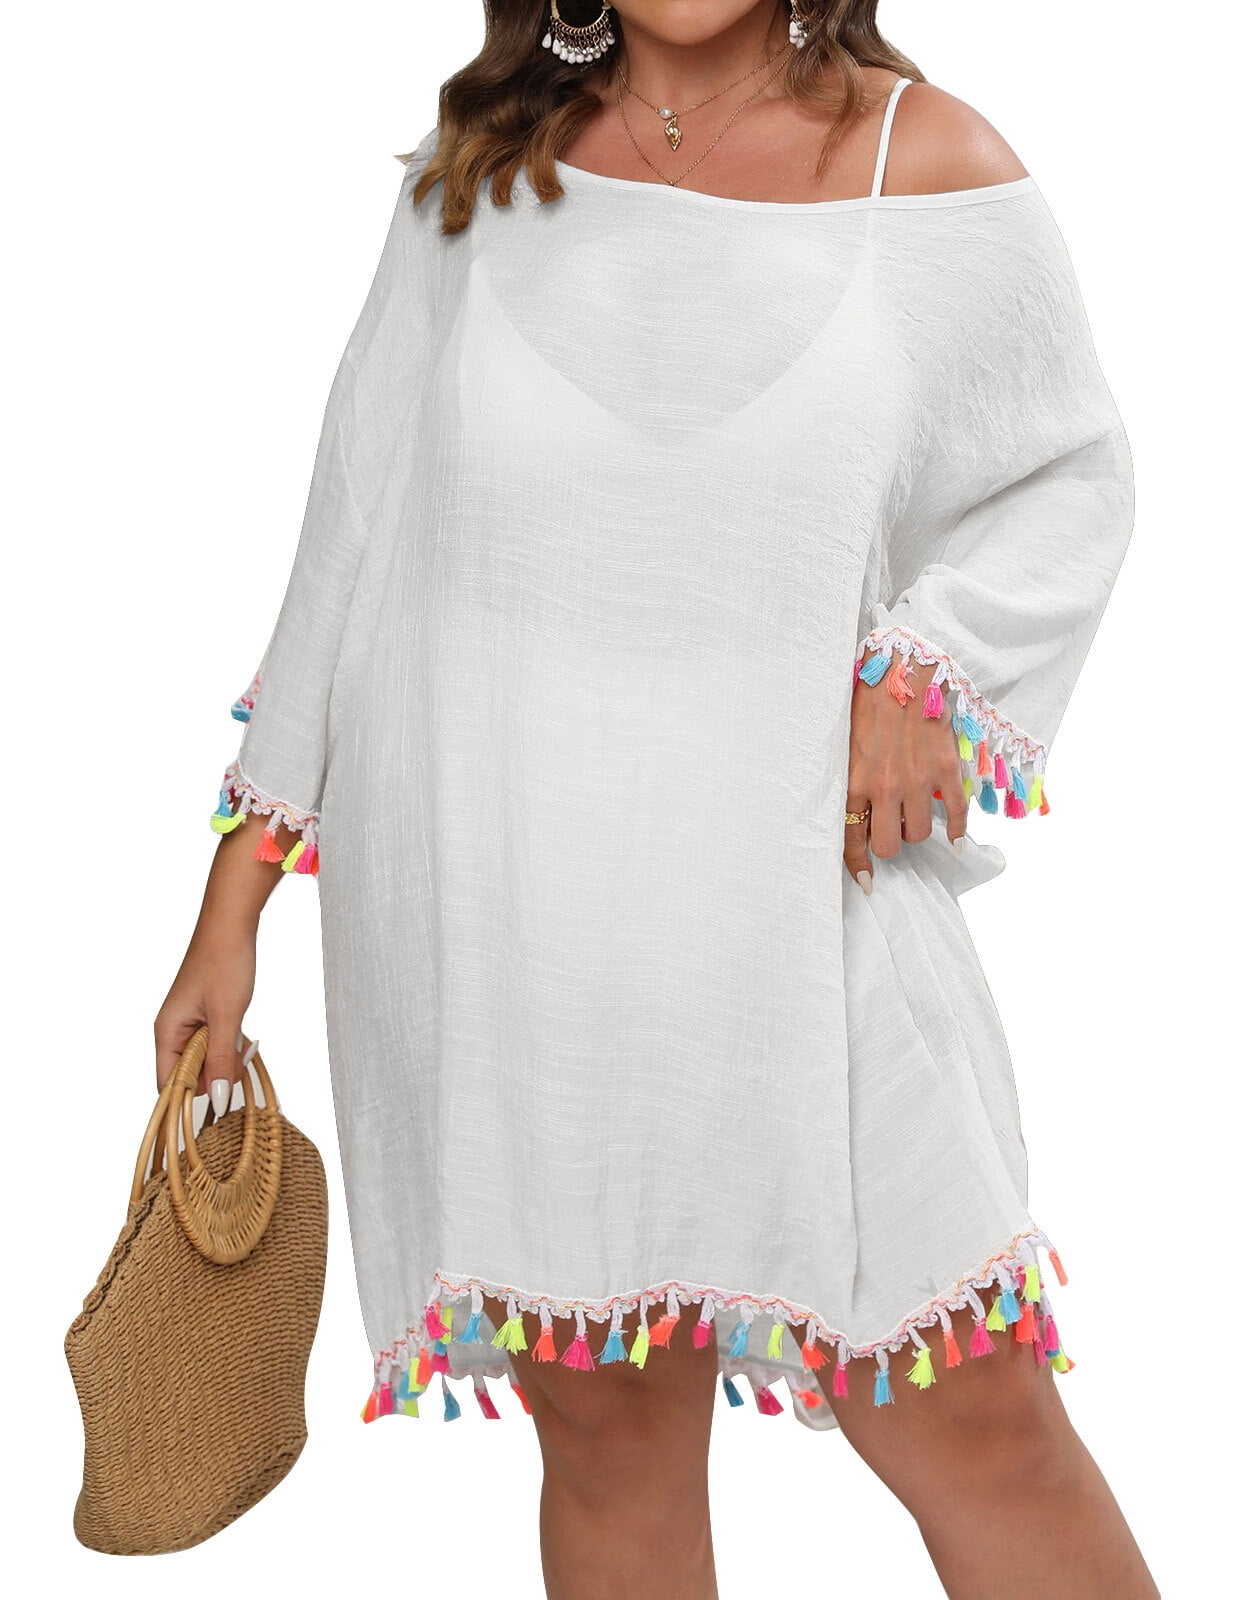 Swim Cover Ups for Women Plus Size Seethrough Backless Sexy Bathing ...